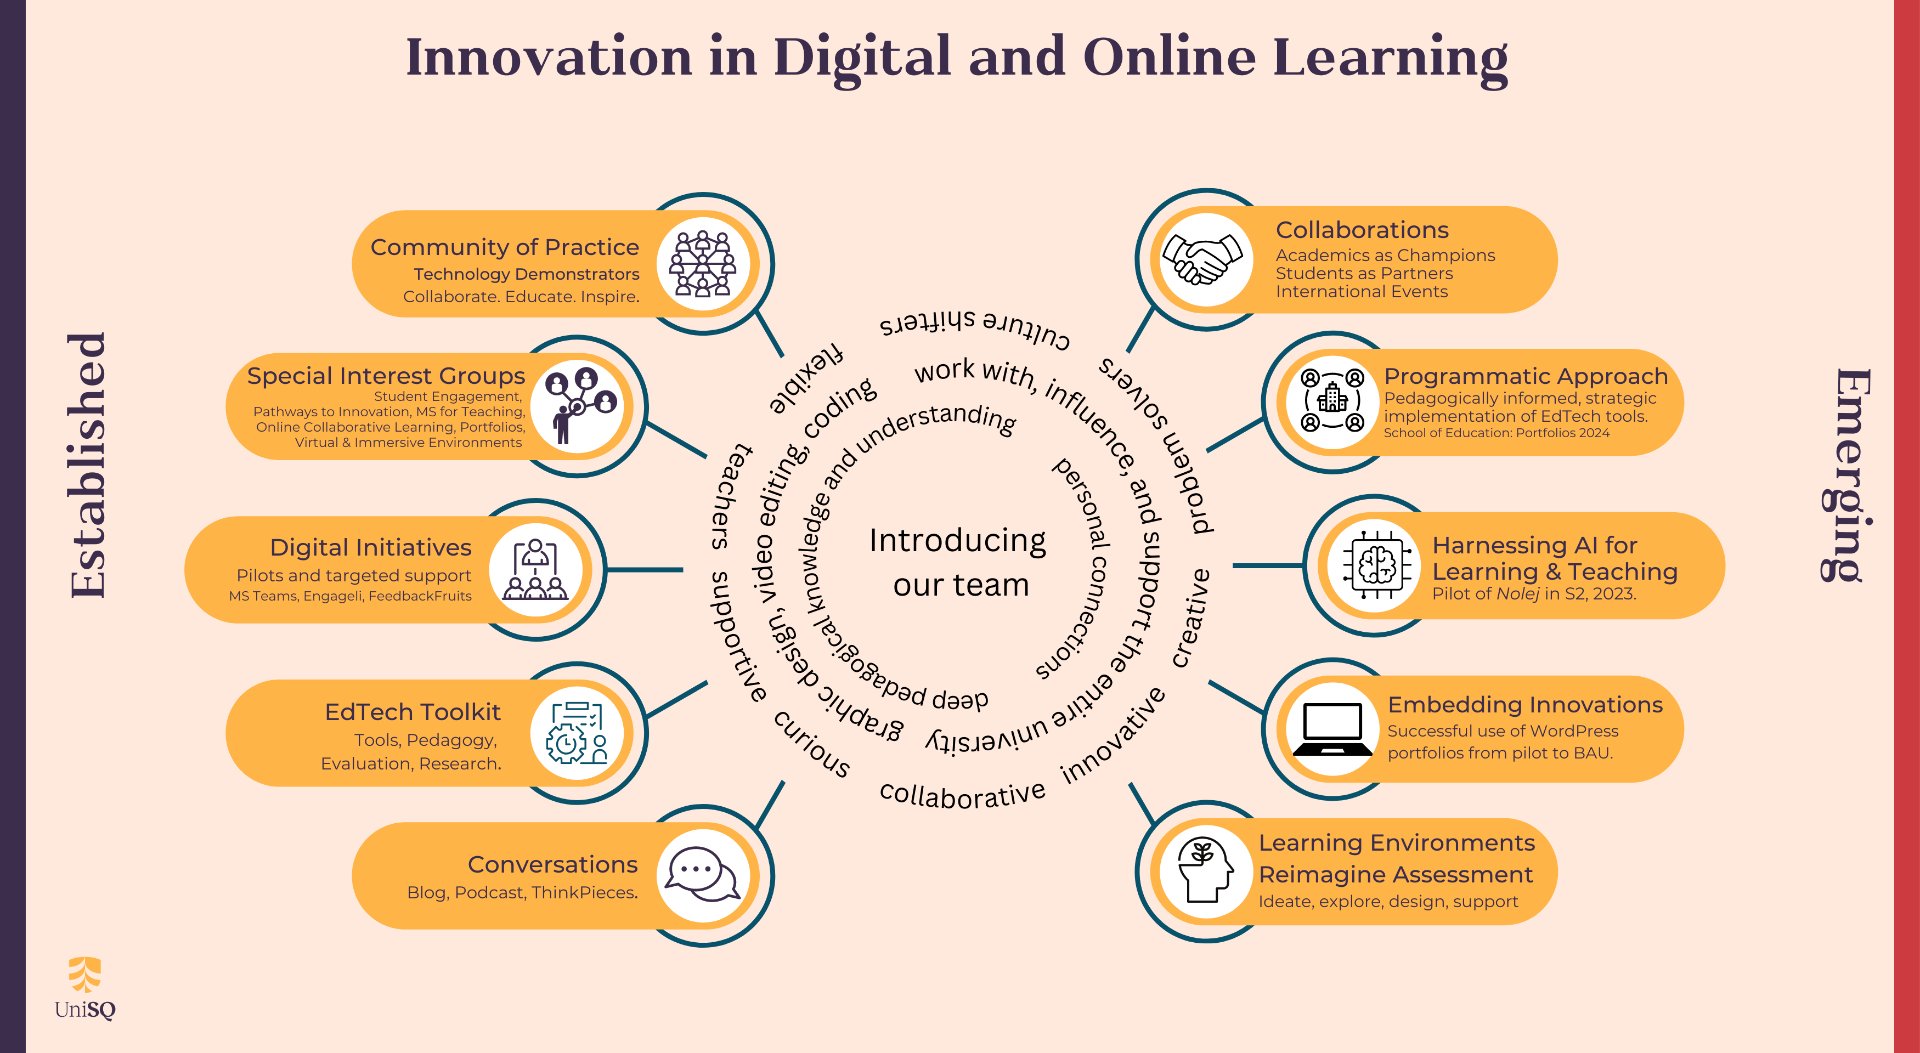 Innovation in digital and online learning